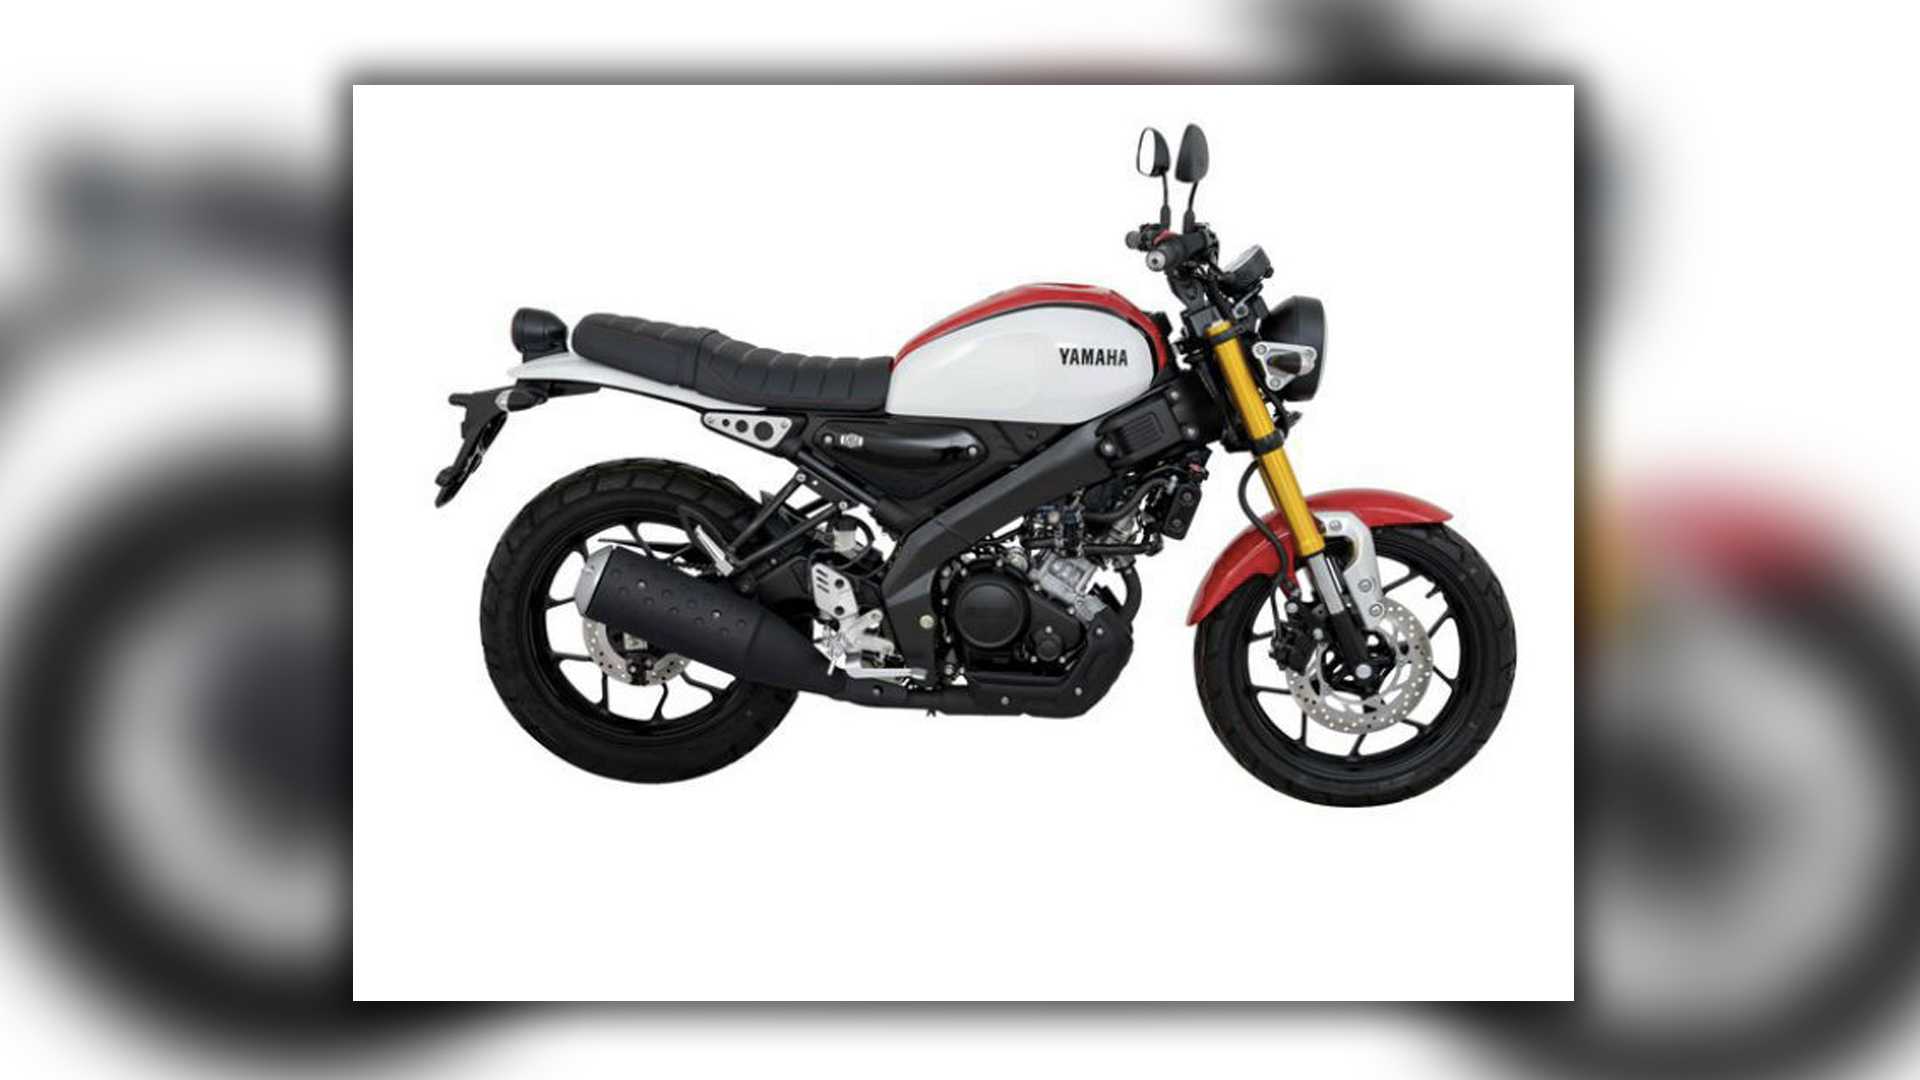 Another Baby Yamaha Possibly In The Works With The XSR 125